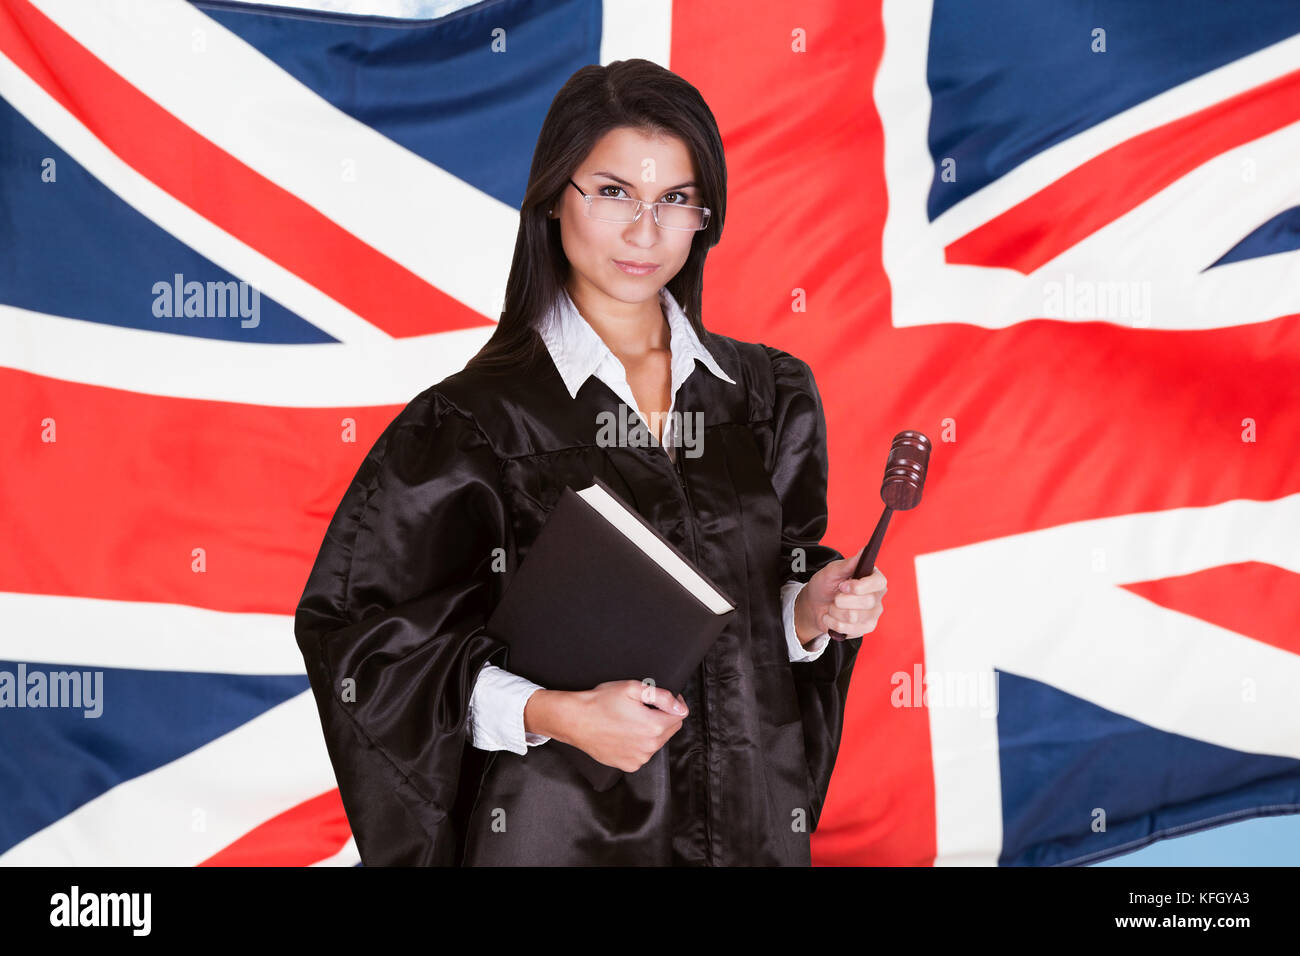 Portrait Of Female Judge With Book And Gavel Standing In Front Of Uk Flag Stock Photo